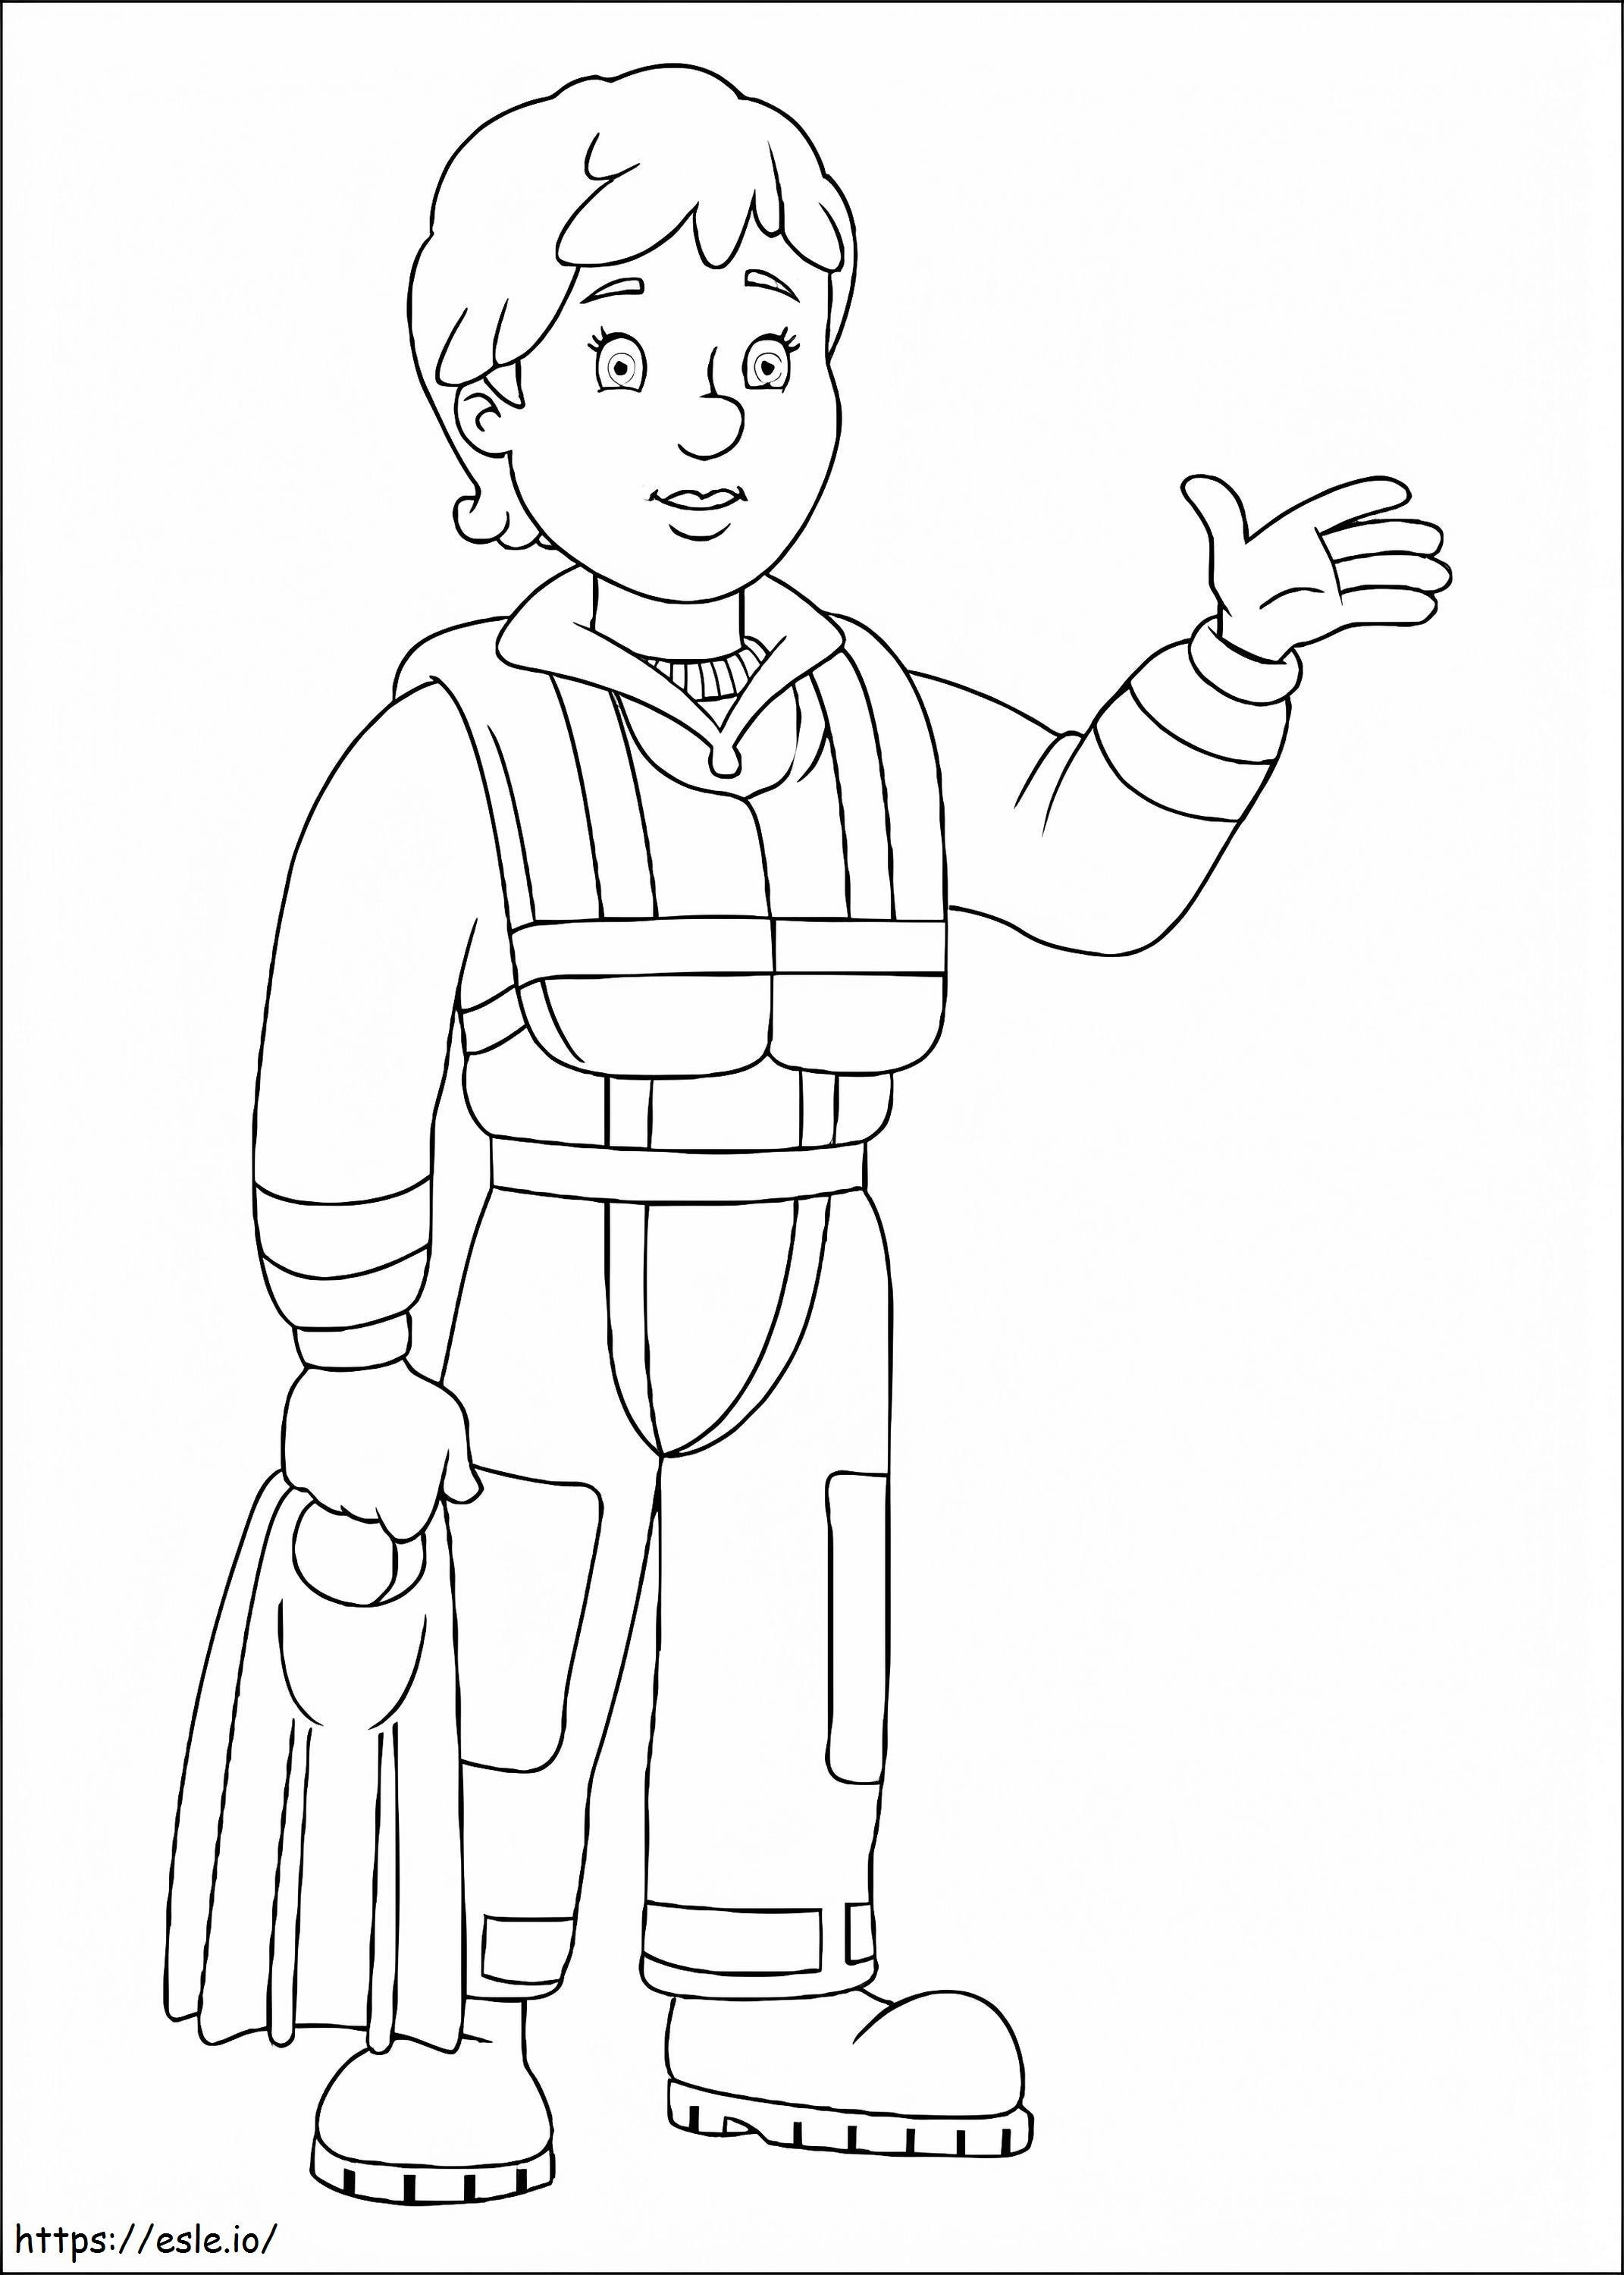 Penny Morris coloring page